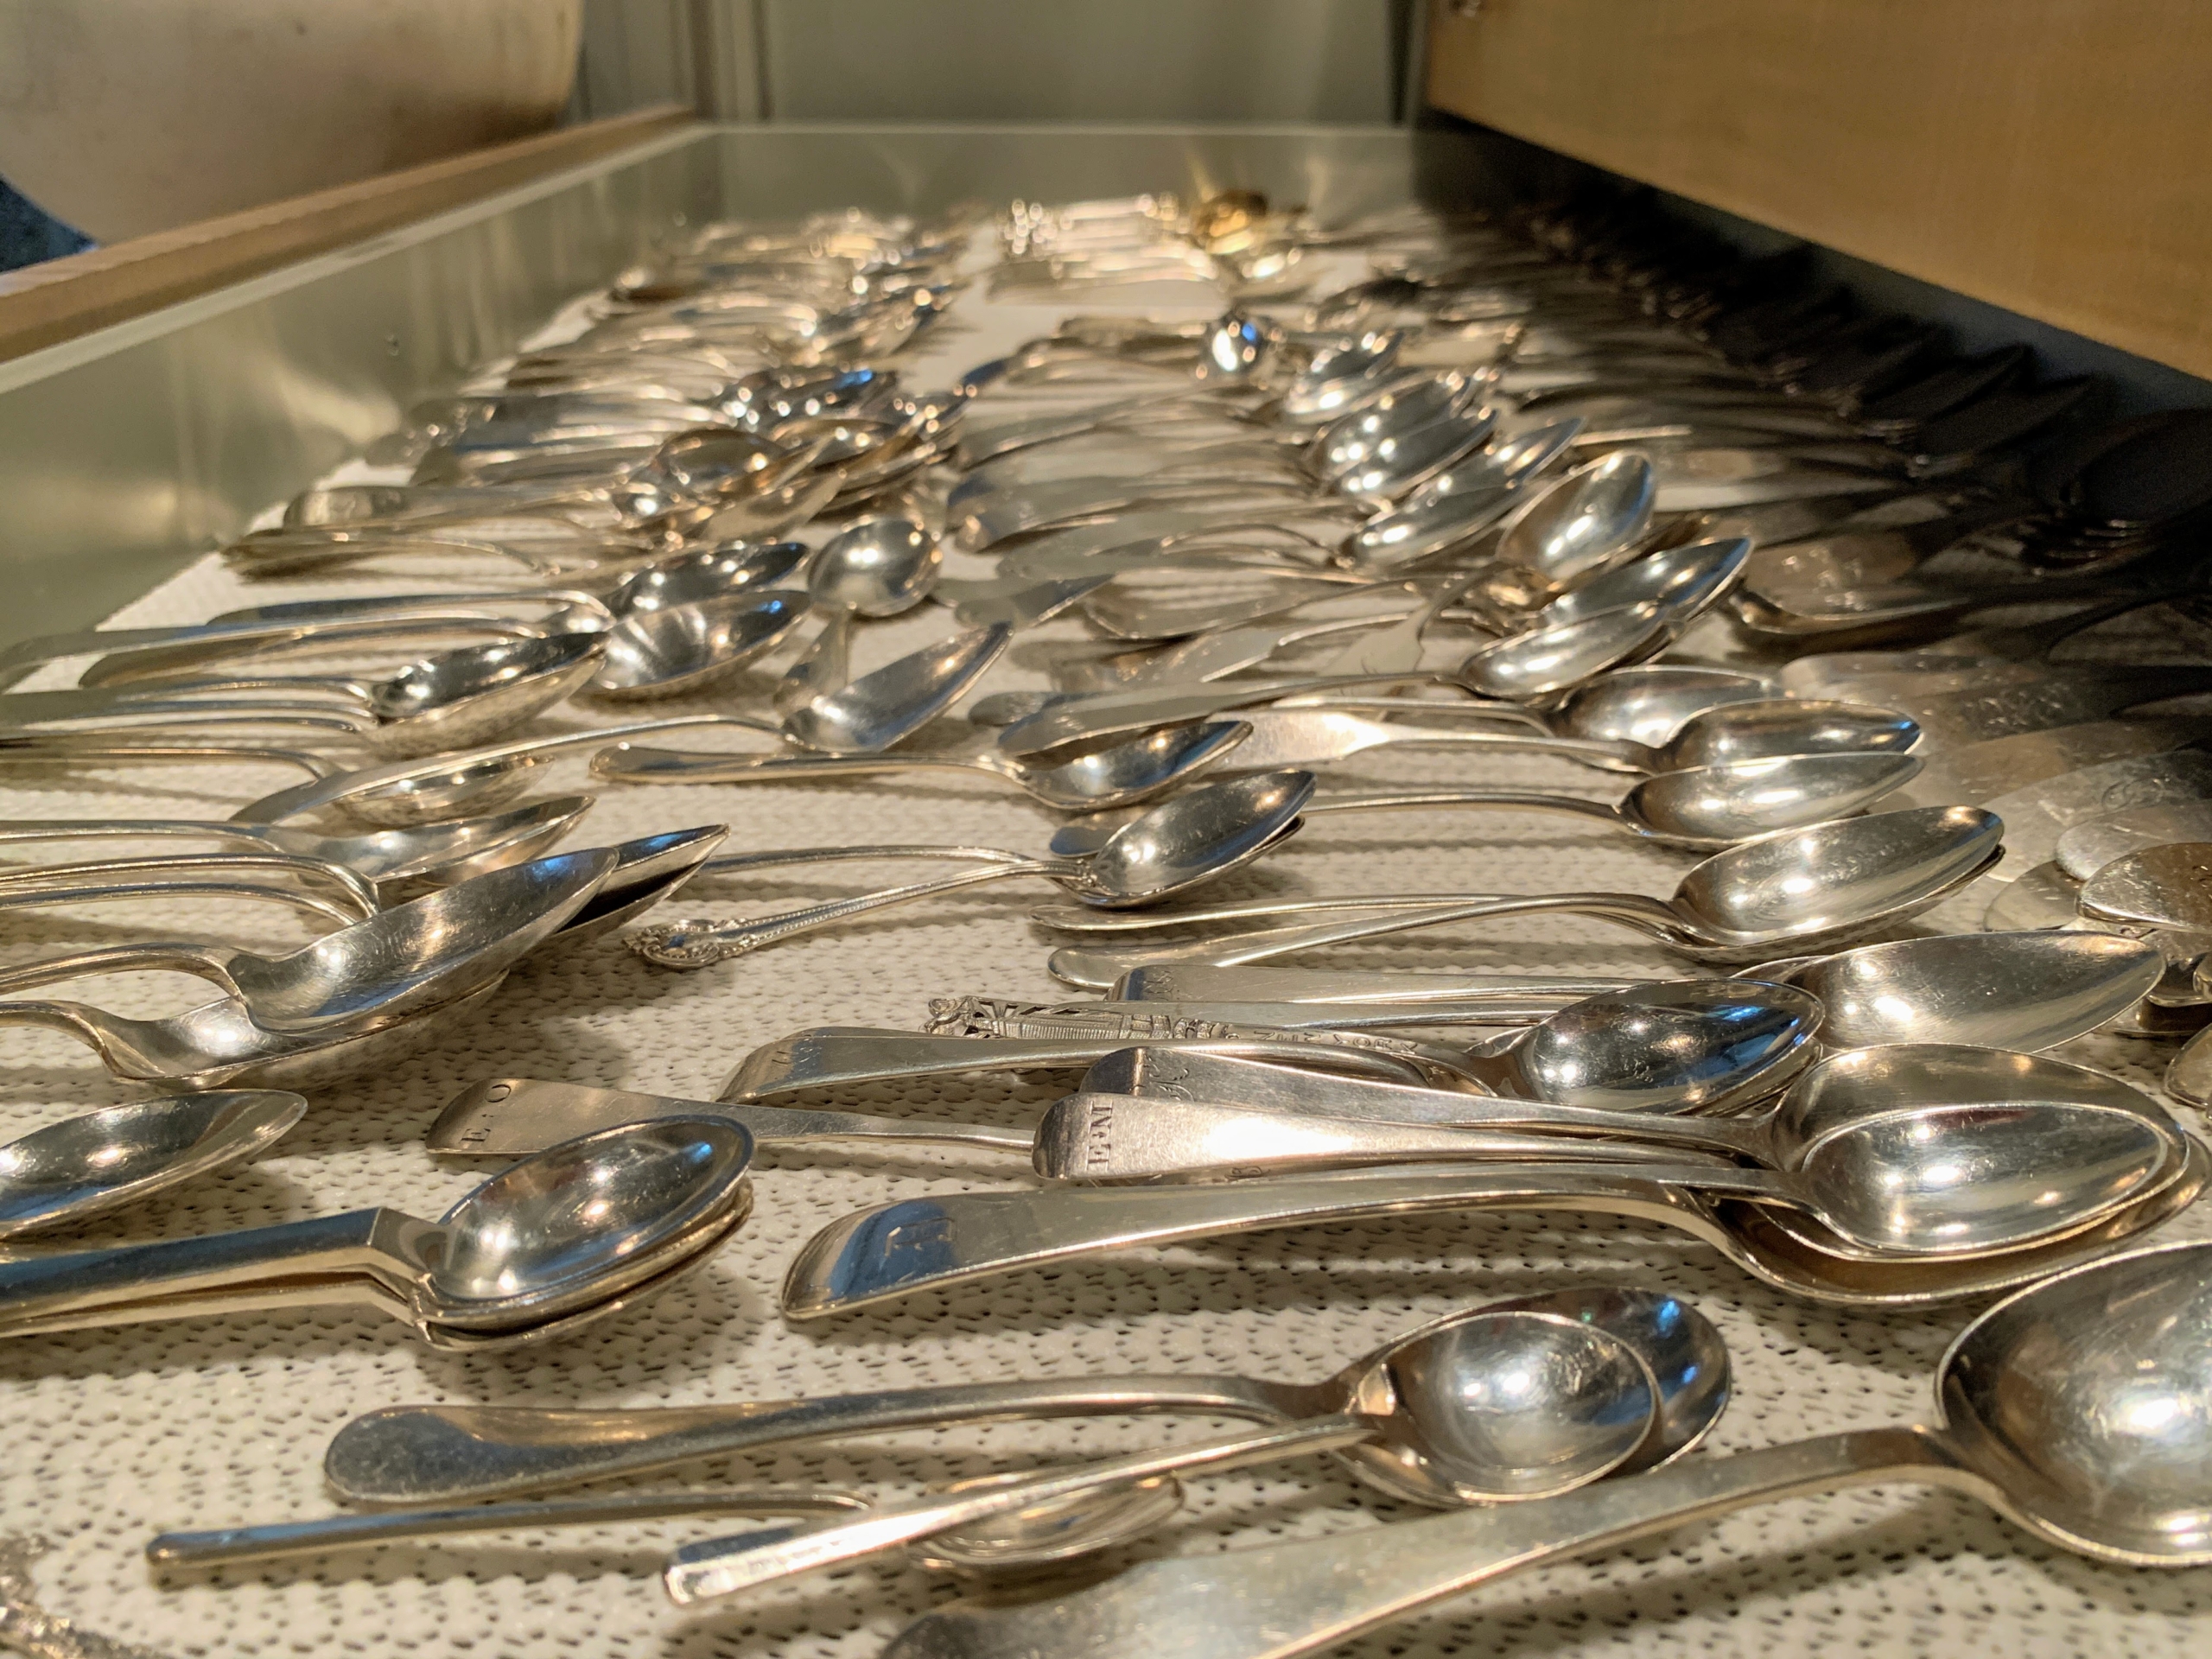 Polishing Silver Forks, Spoons, and Knives - The Martha Stewart Blog